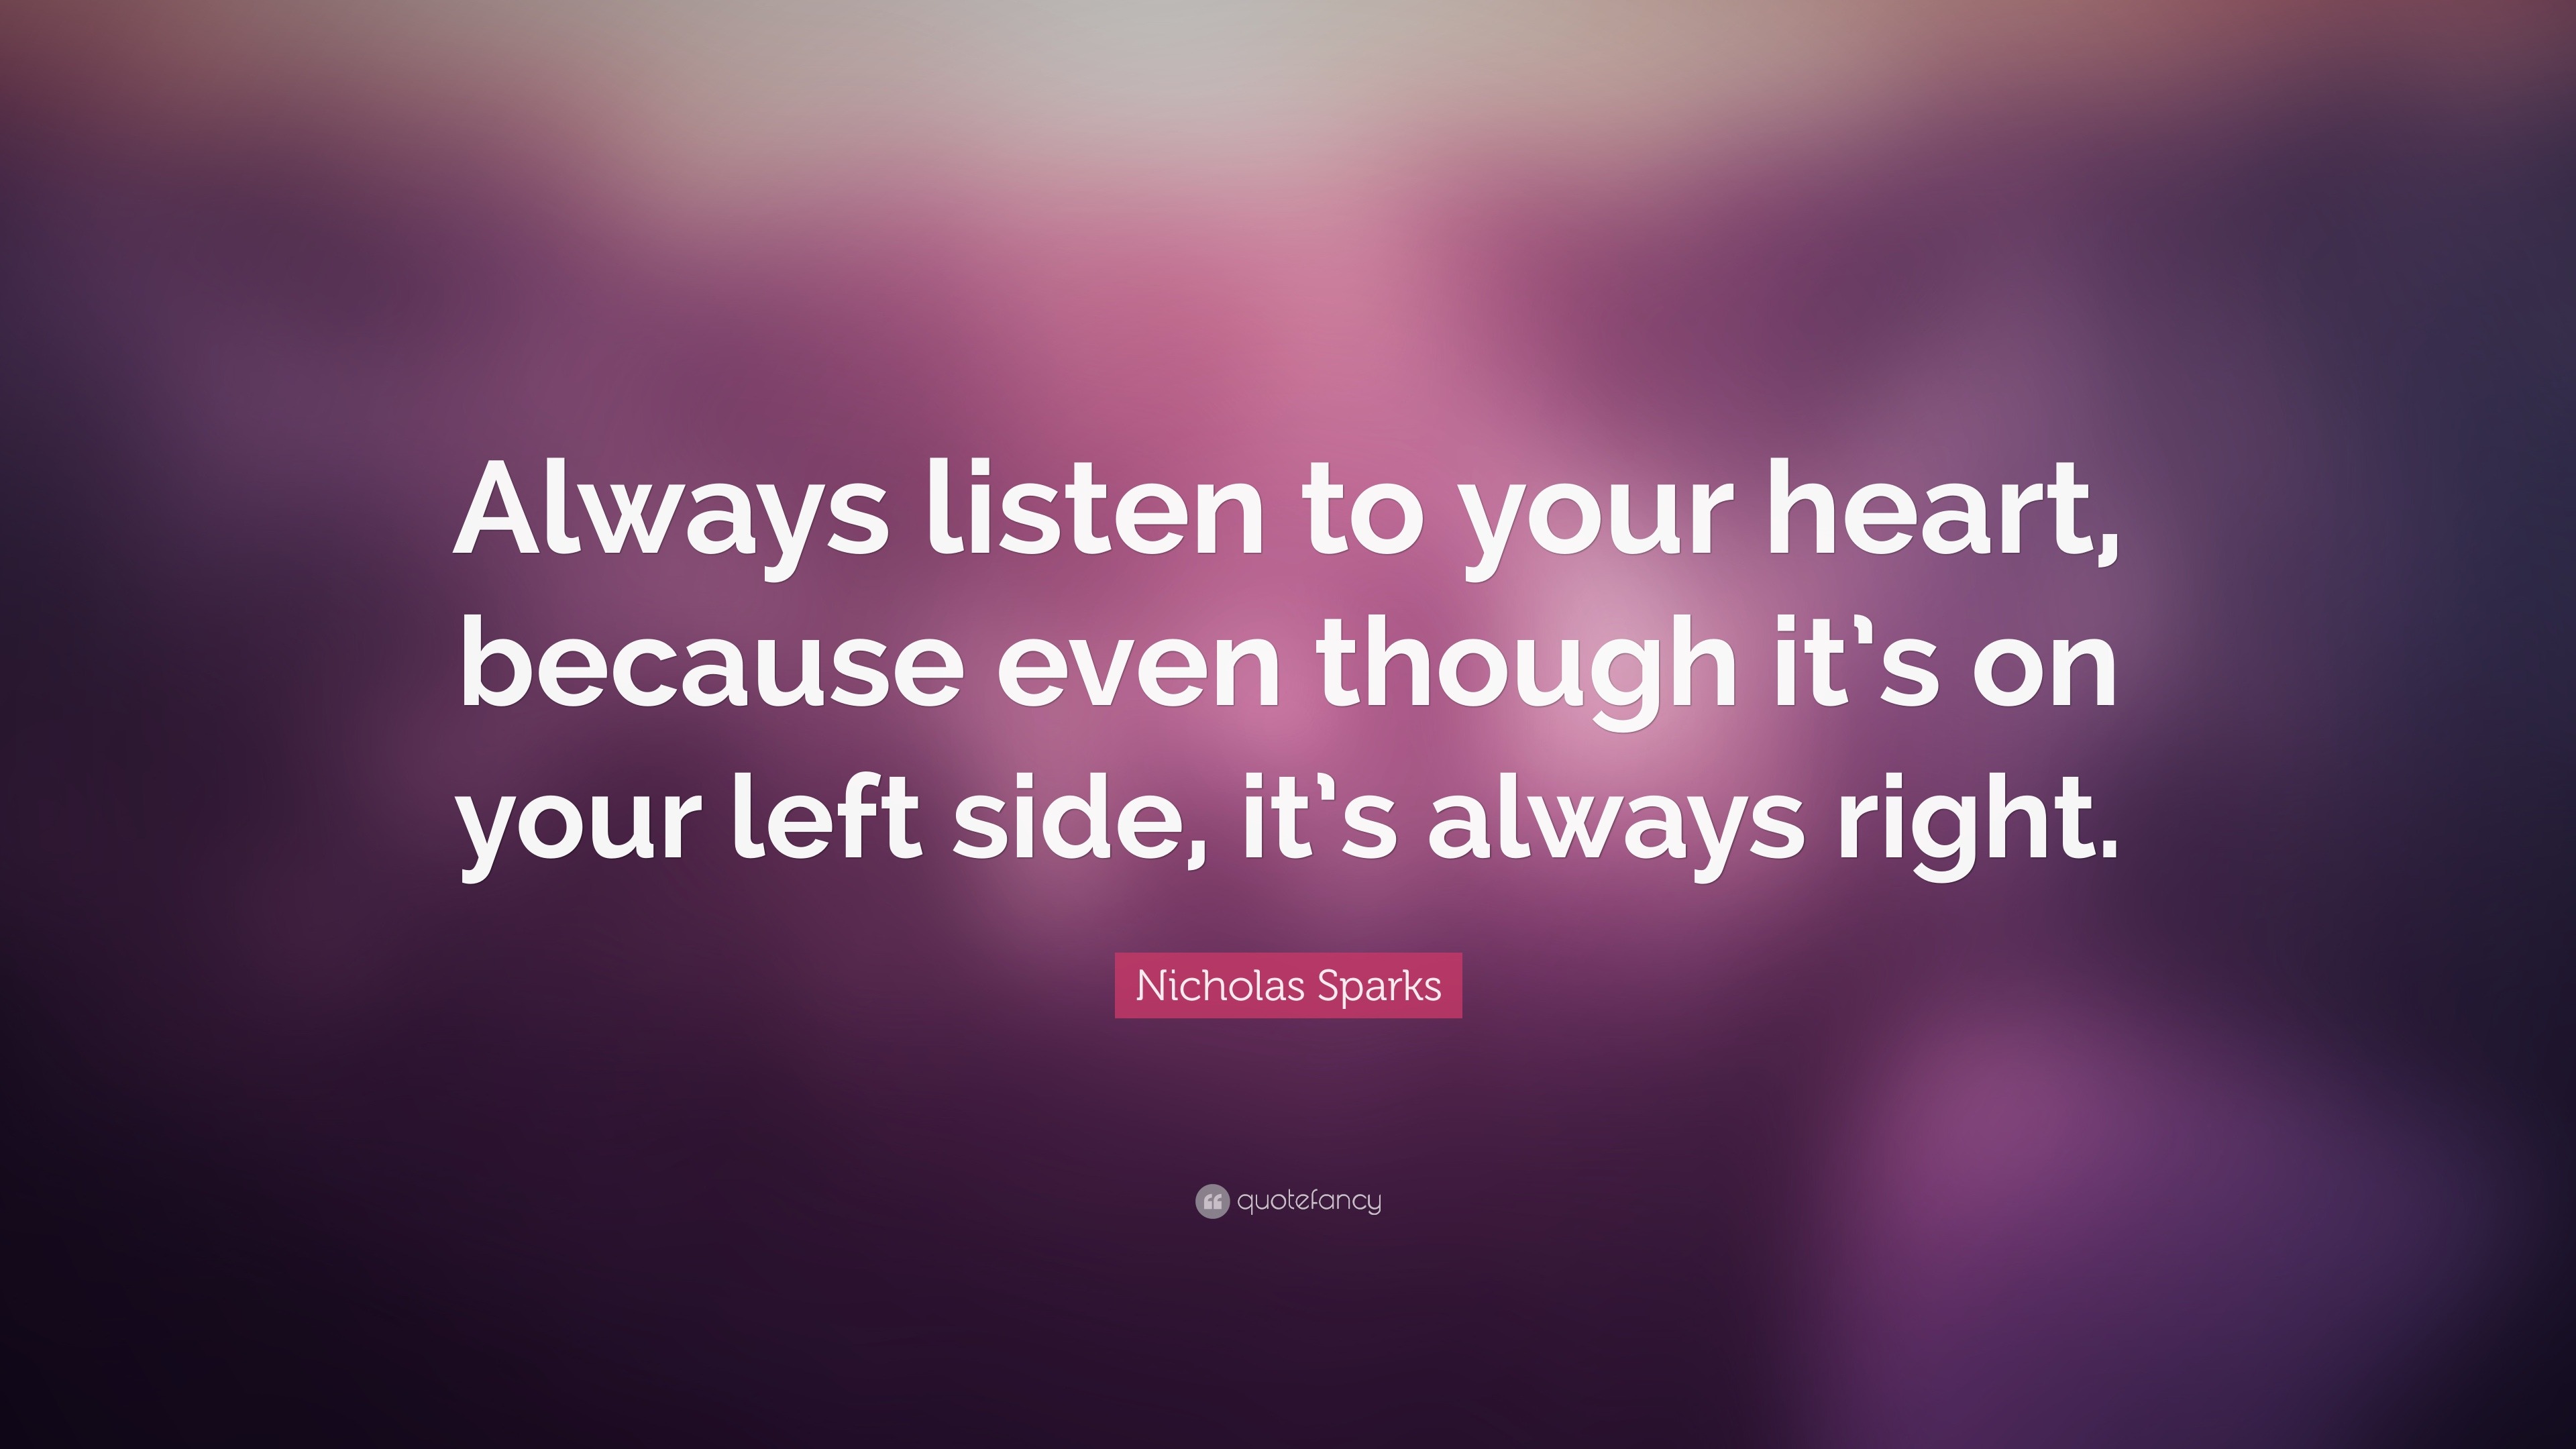 Nicholas Sparks Quote: “Always listen to your heart, because even